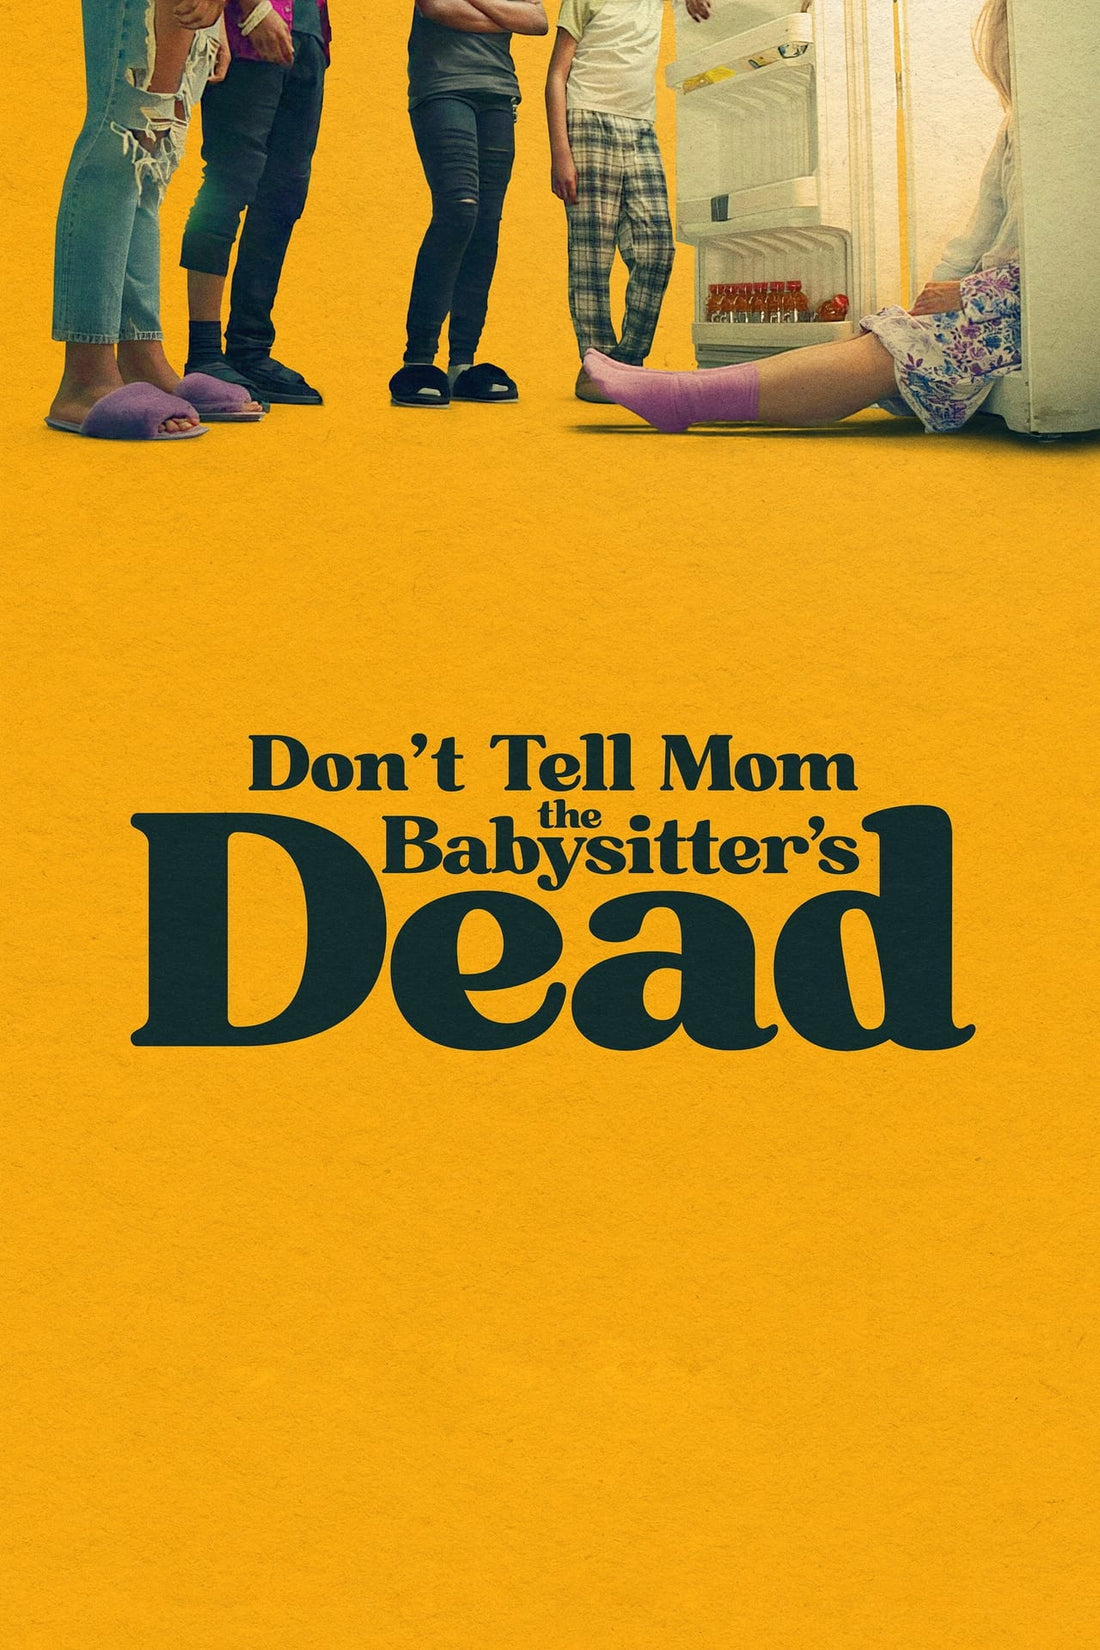 Where to watch Don't Tell Mom the Babysitter's Dead